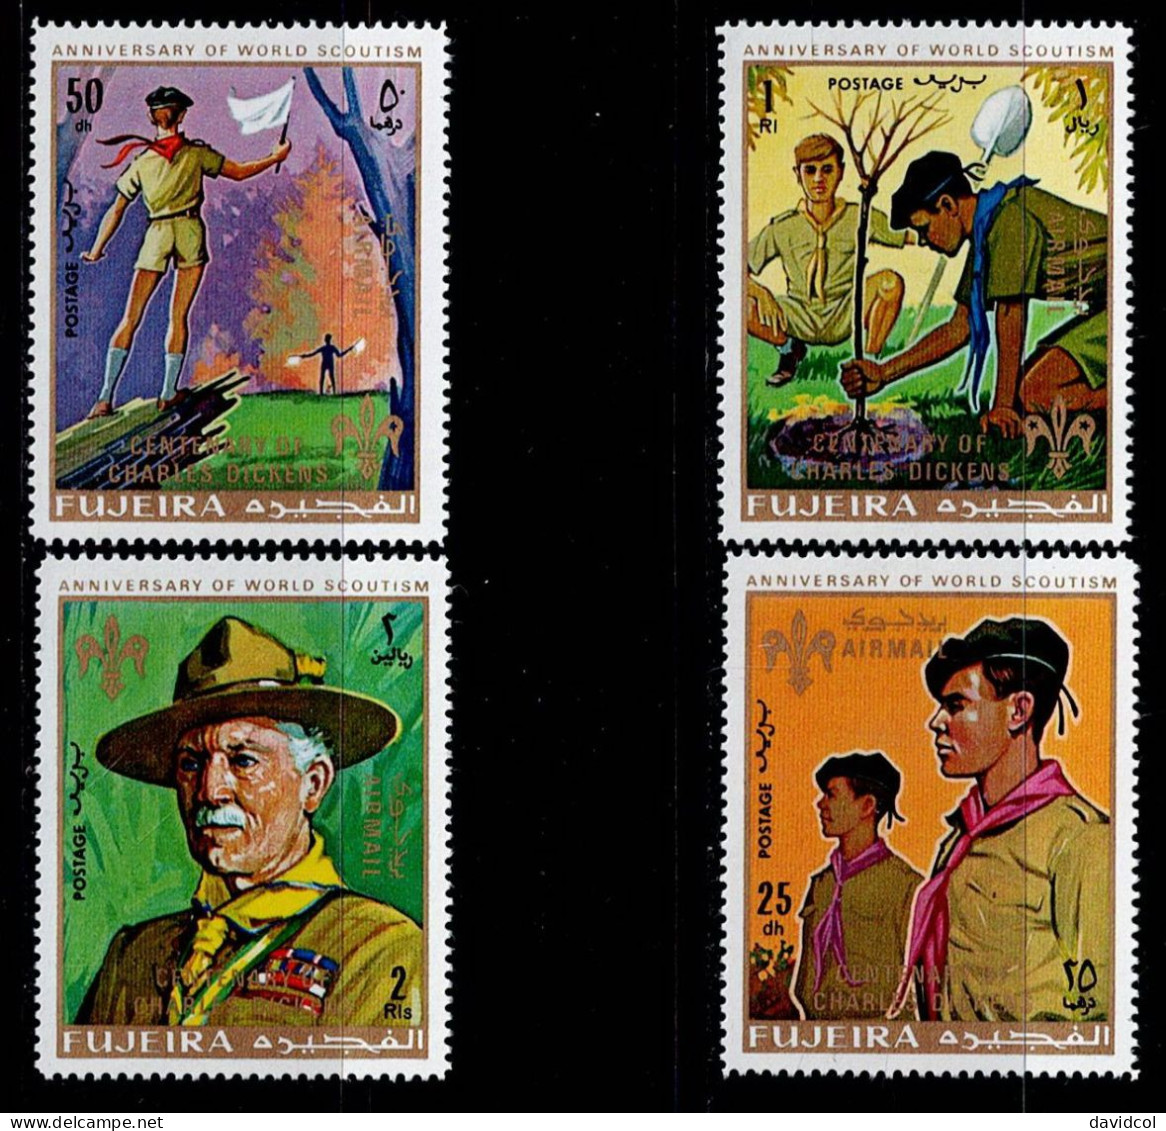 FUJ-03- FUJEIRA - 1970 - MNH -SCOUTS- ANNIVERSARY OF WORLD SCOUTISM-OVERPRINTED CENTENNARY OF CHARLES DICKENS - Fudschaira